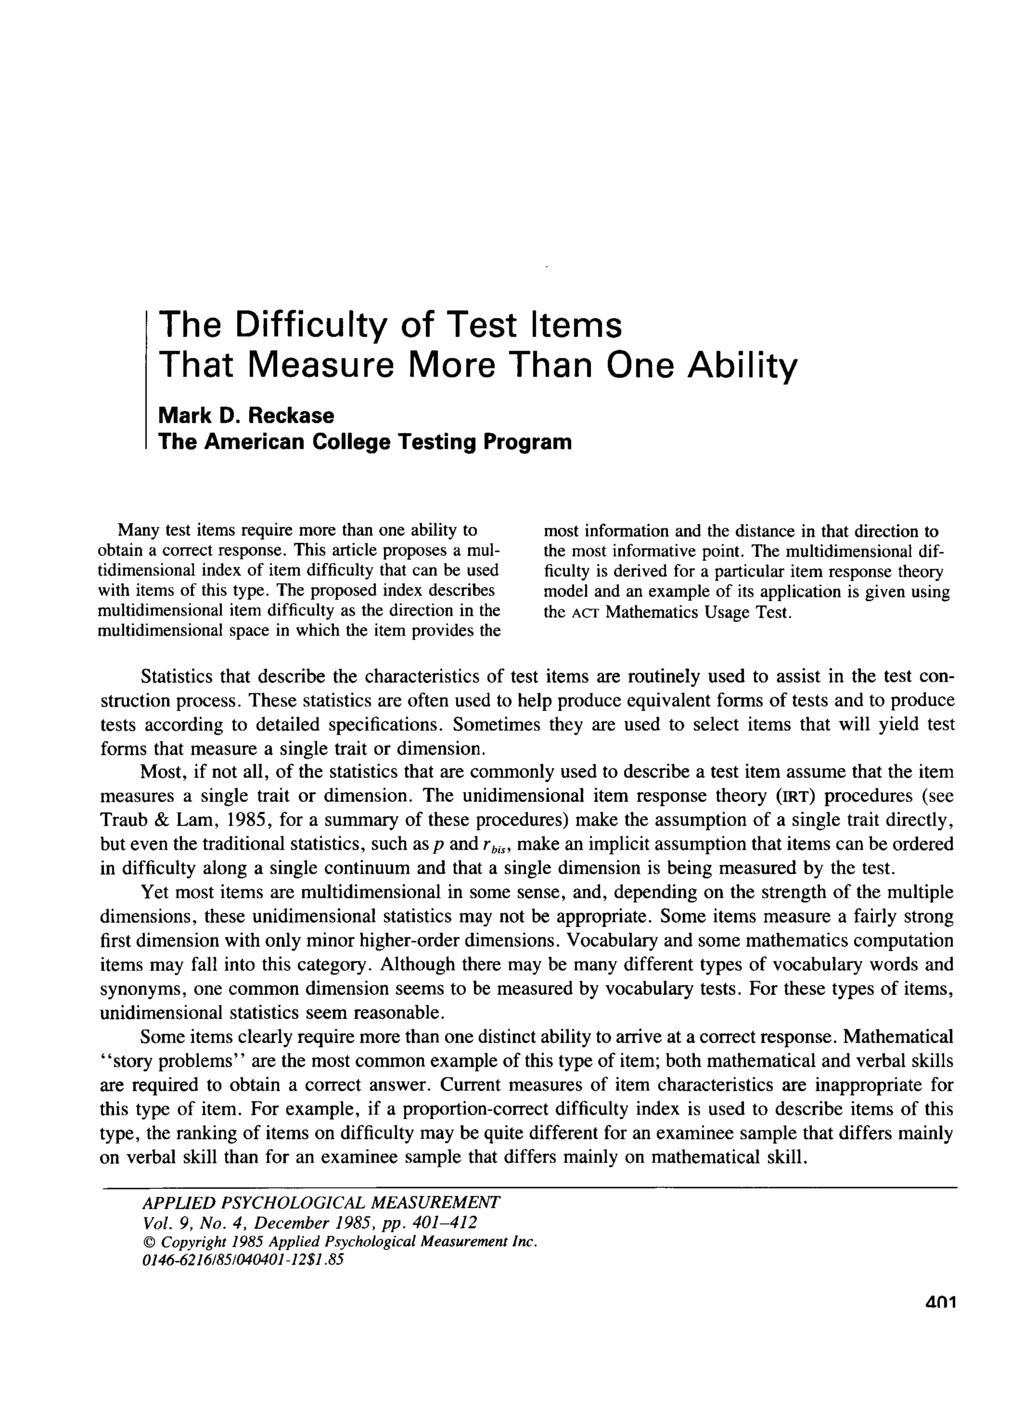 The Difficulty of Test Items That Measure More Than One Ability Mark D. Reckase The American College Testing Program Many test items require more than one ability to obtain a correct response.